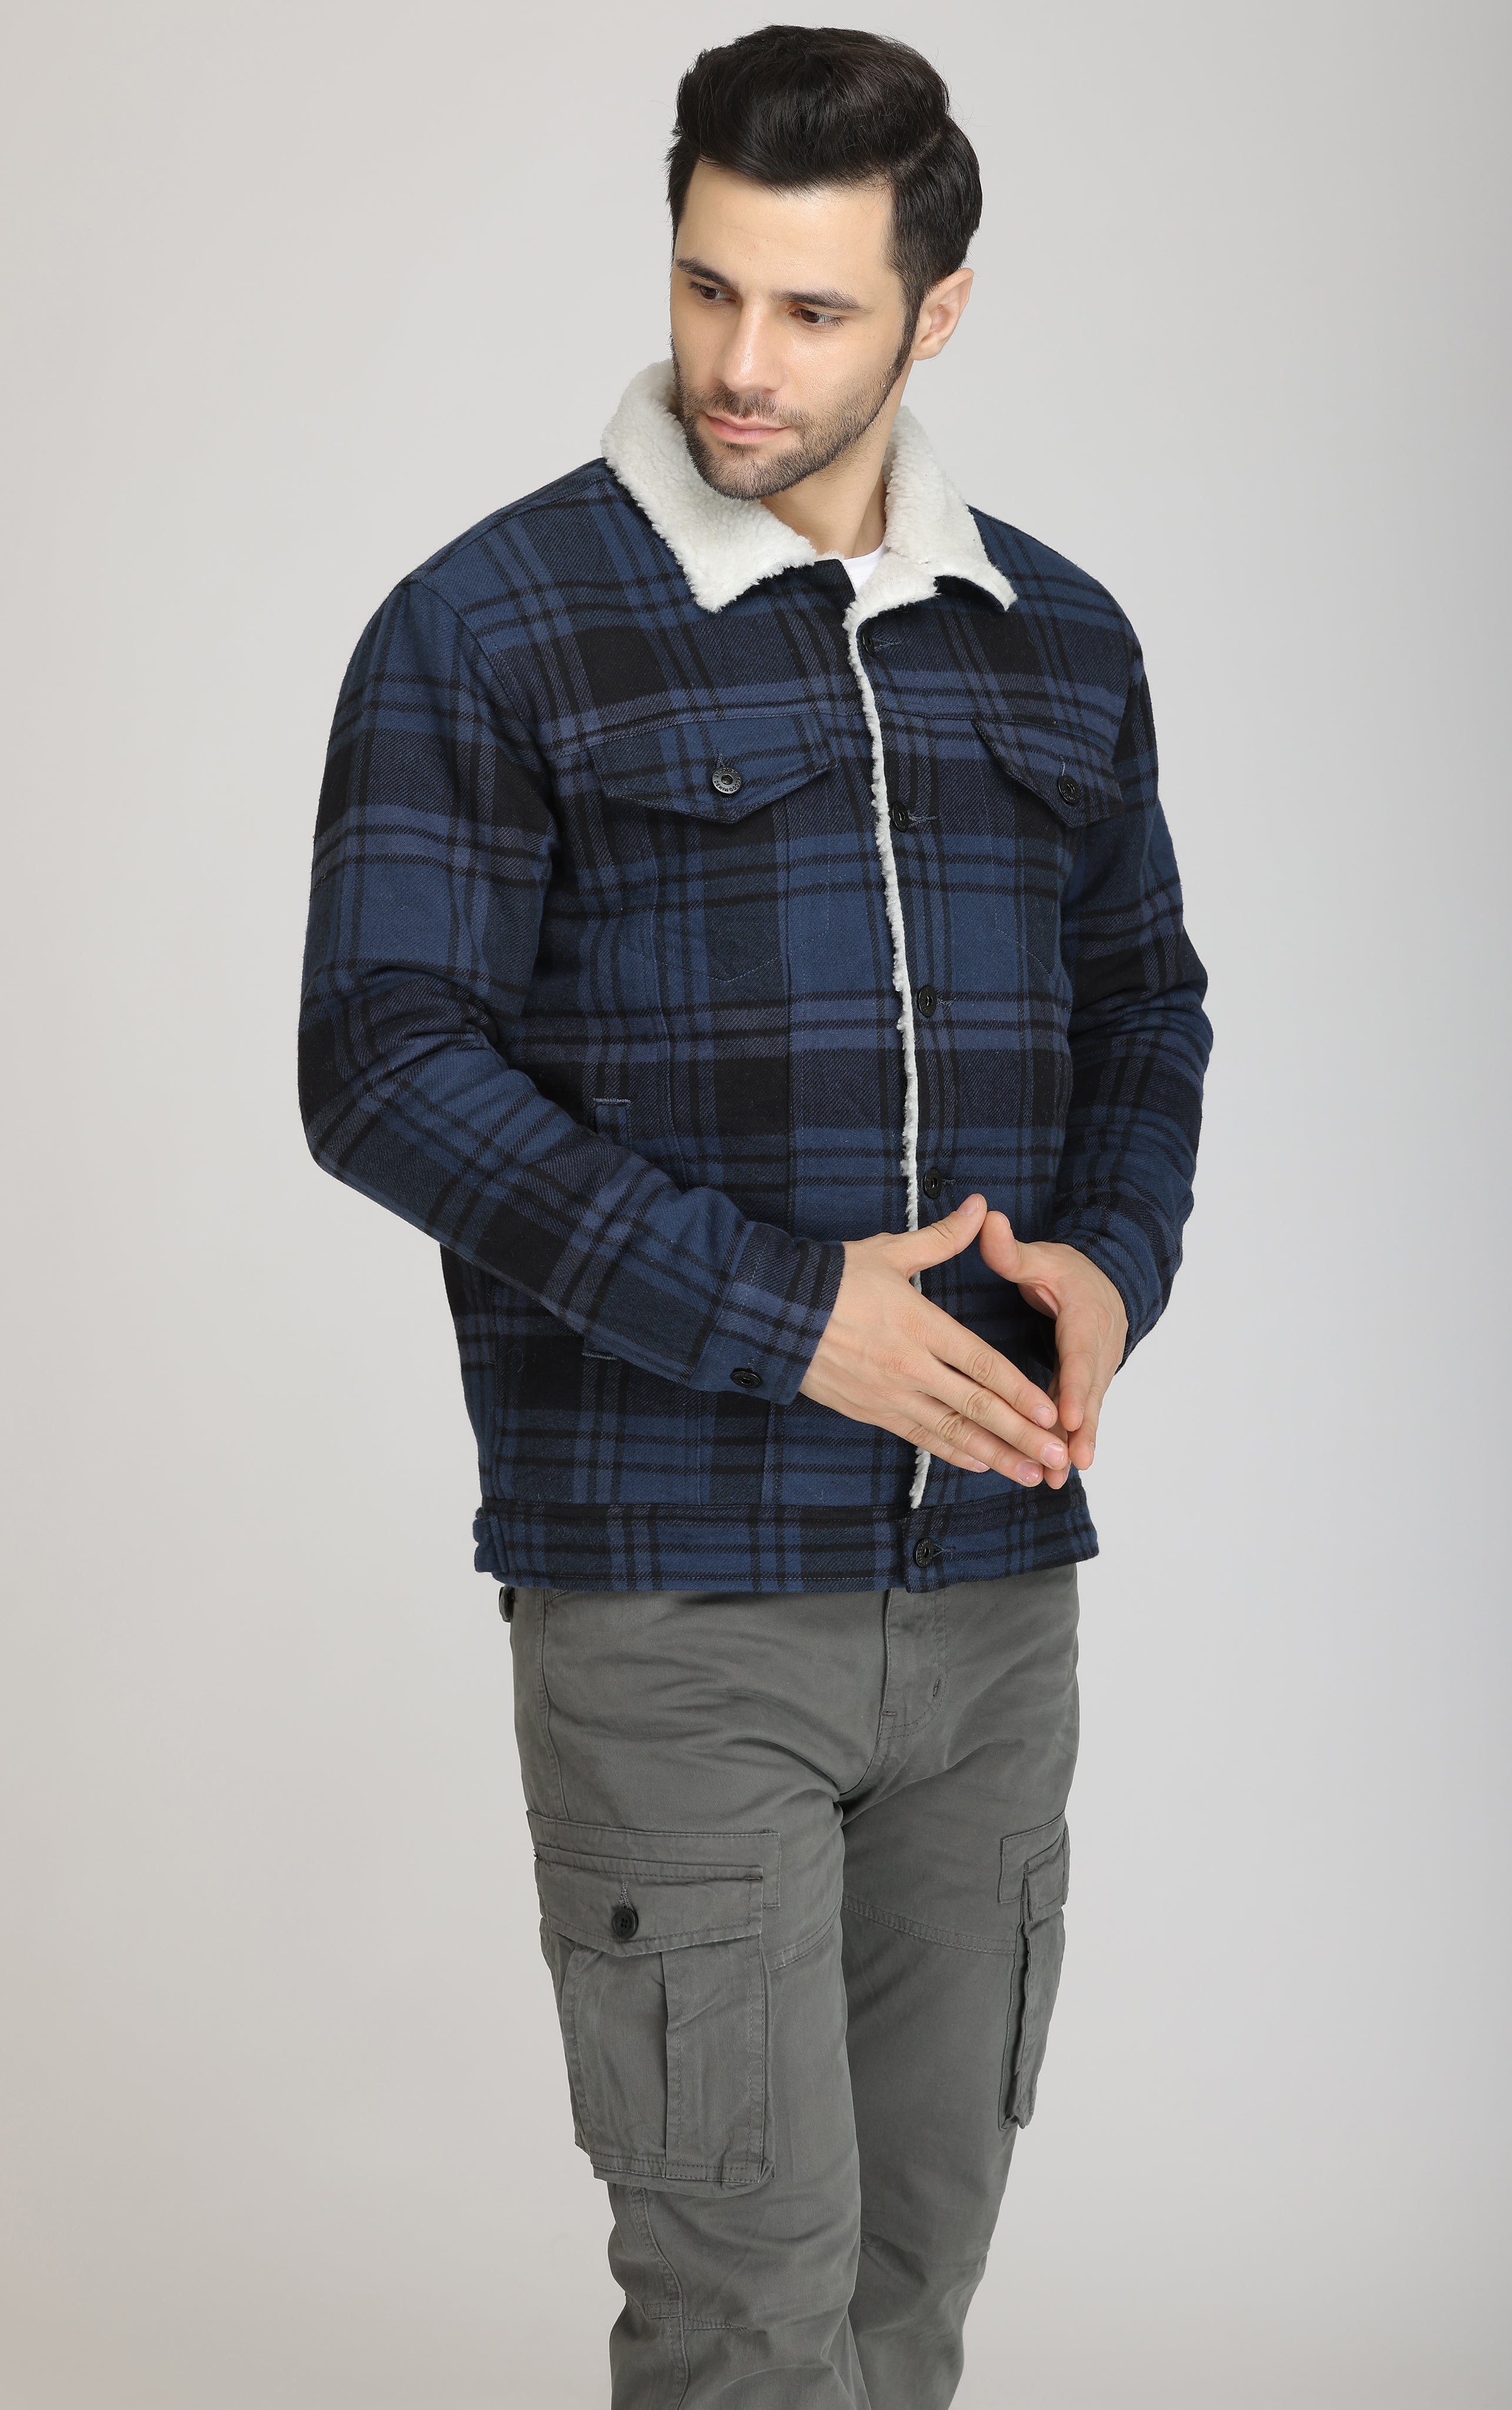 Shop for the perfect full sleeves jacket for men from Woodland.